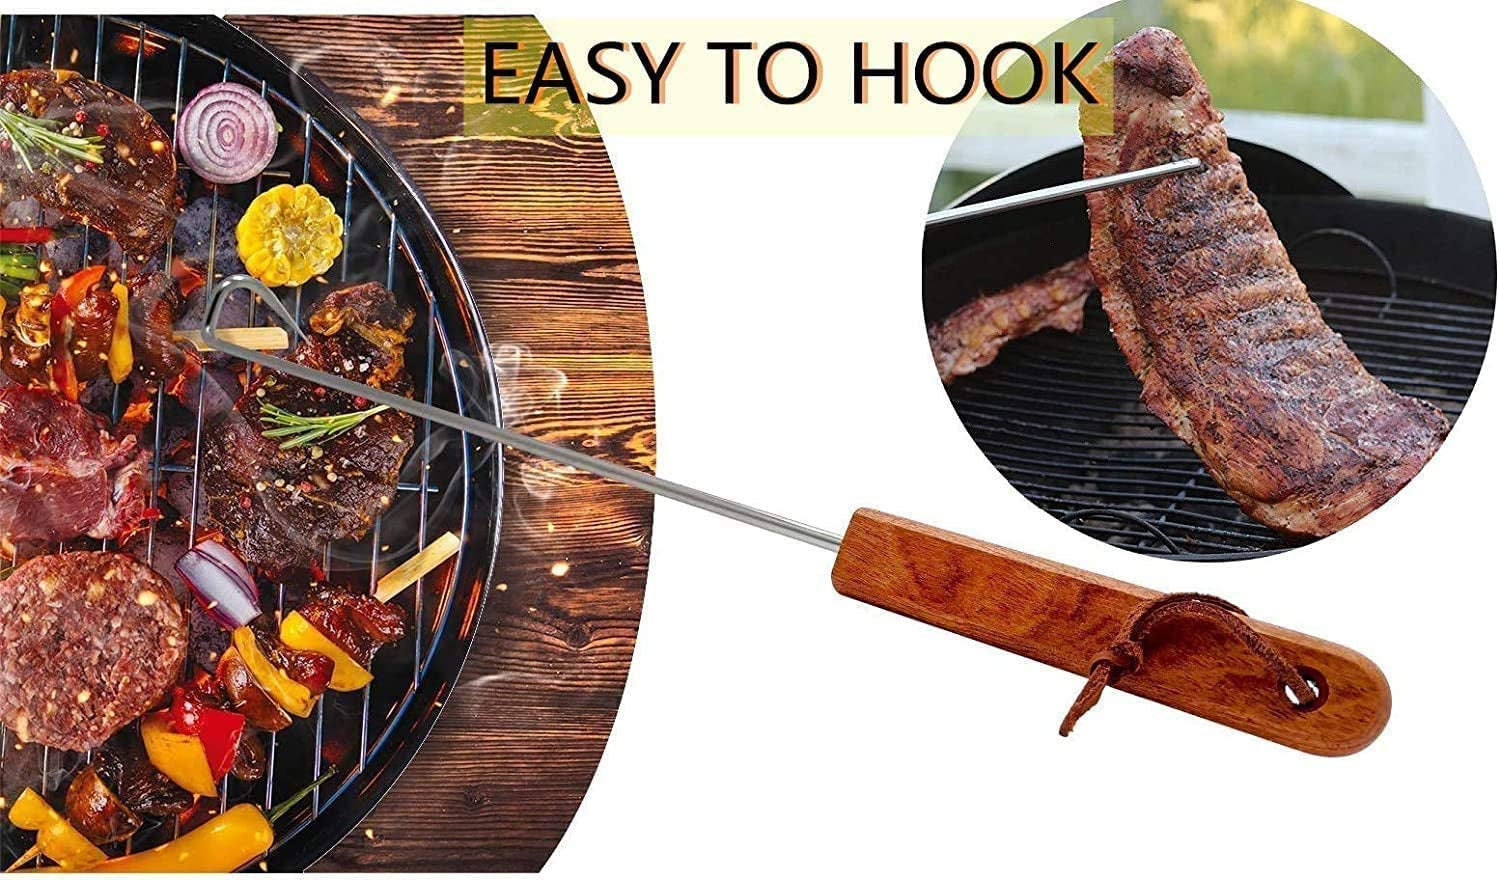 LQLMCOS Food Flipper Turner Hooks Stainless Steel BBQ Meat Hooks Cooking Barbecue Turners Hooks Grill Accessories with Wooden Handle for Grilling & Smoking (Style A-One Pack)